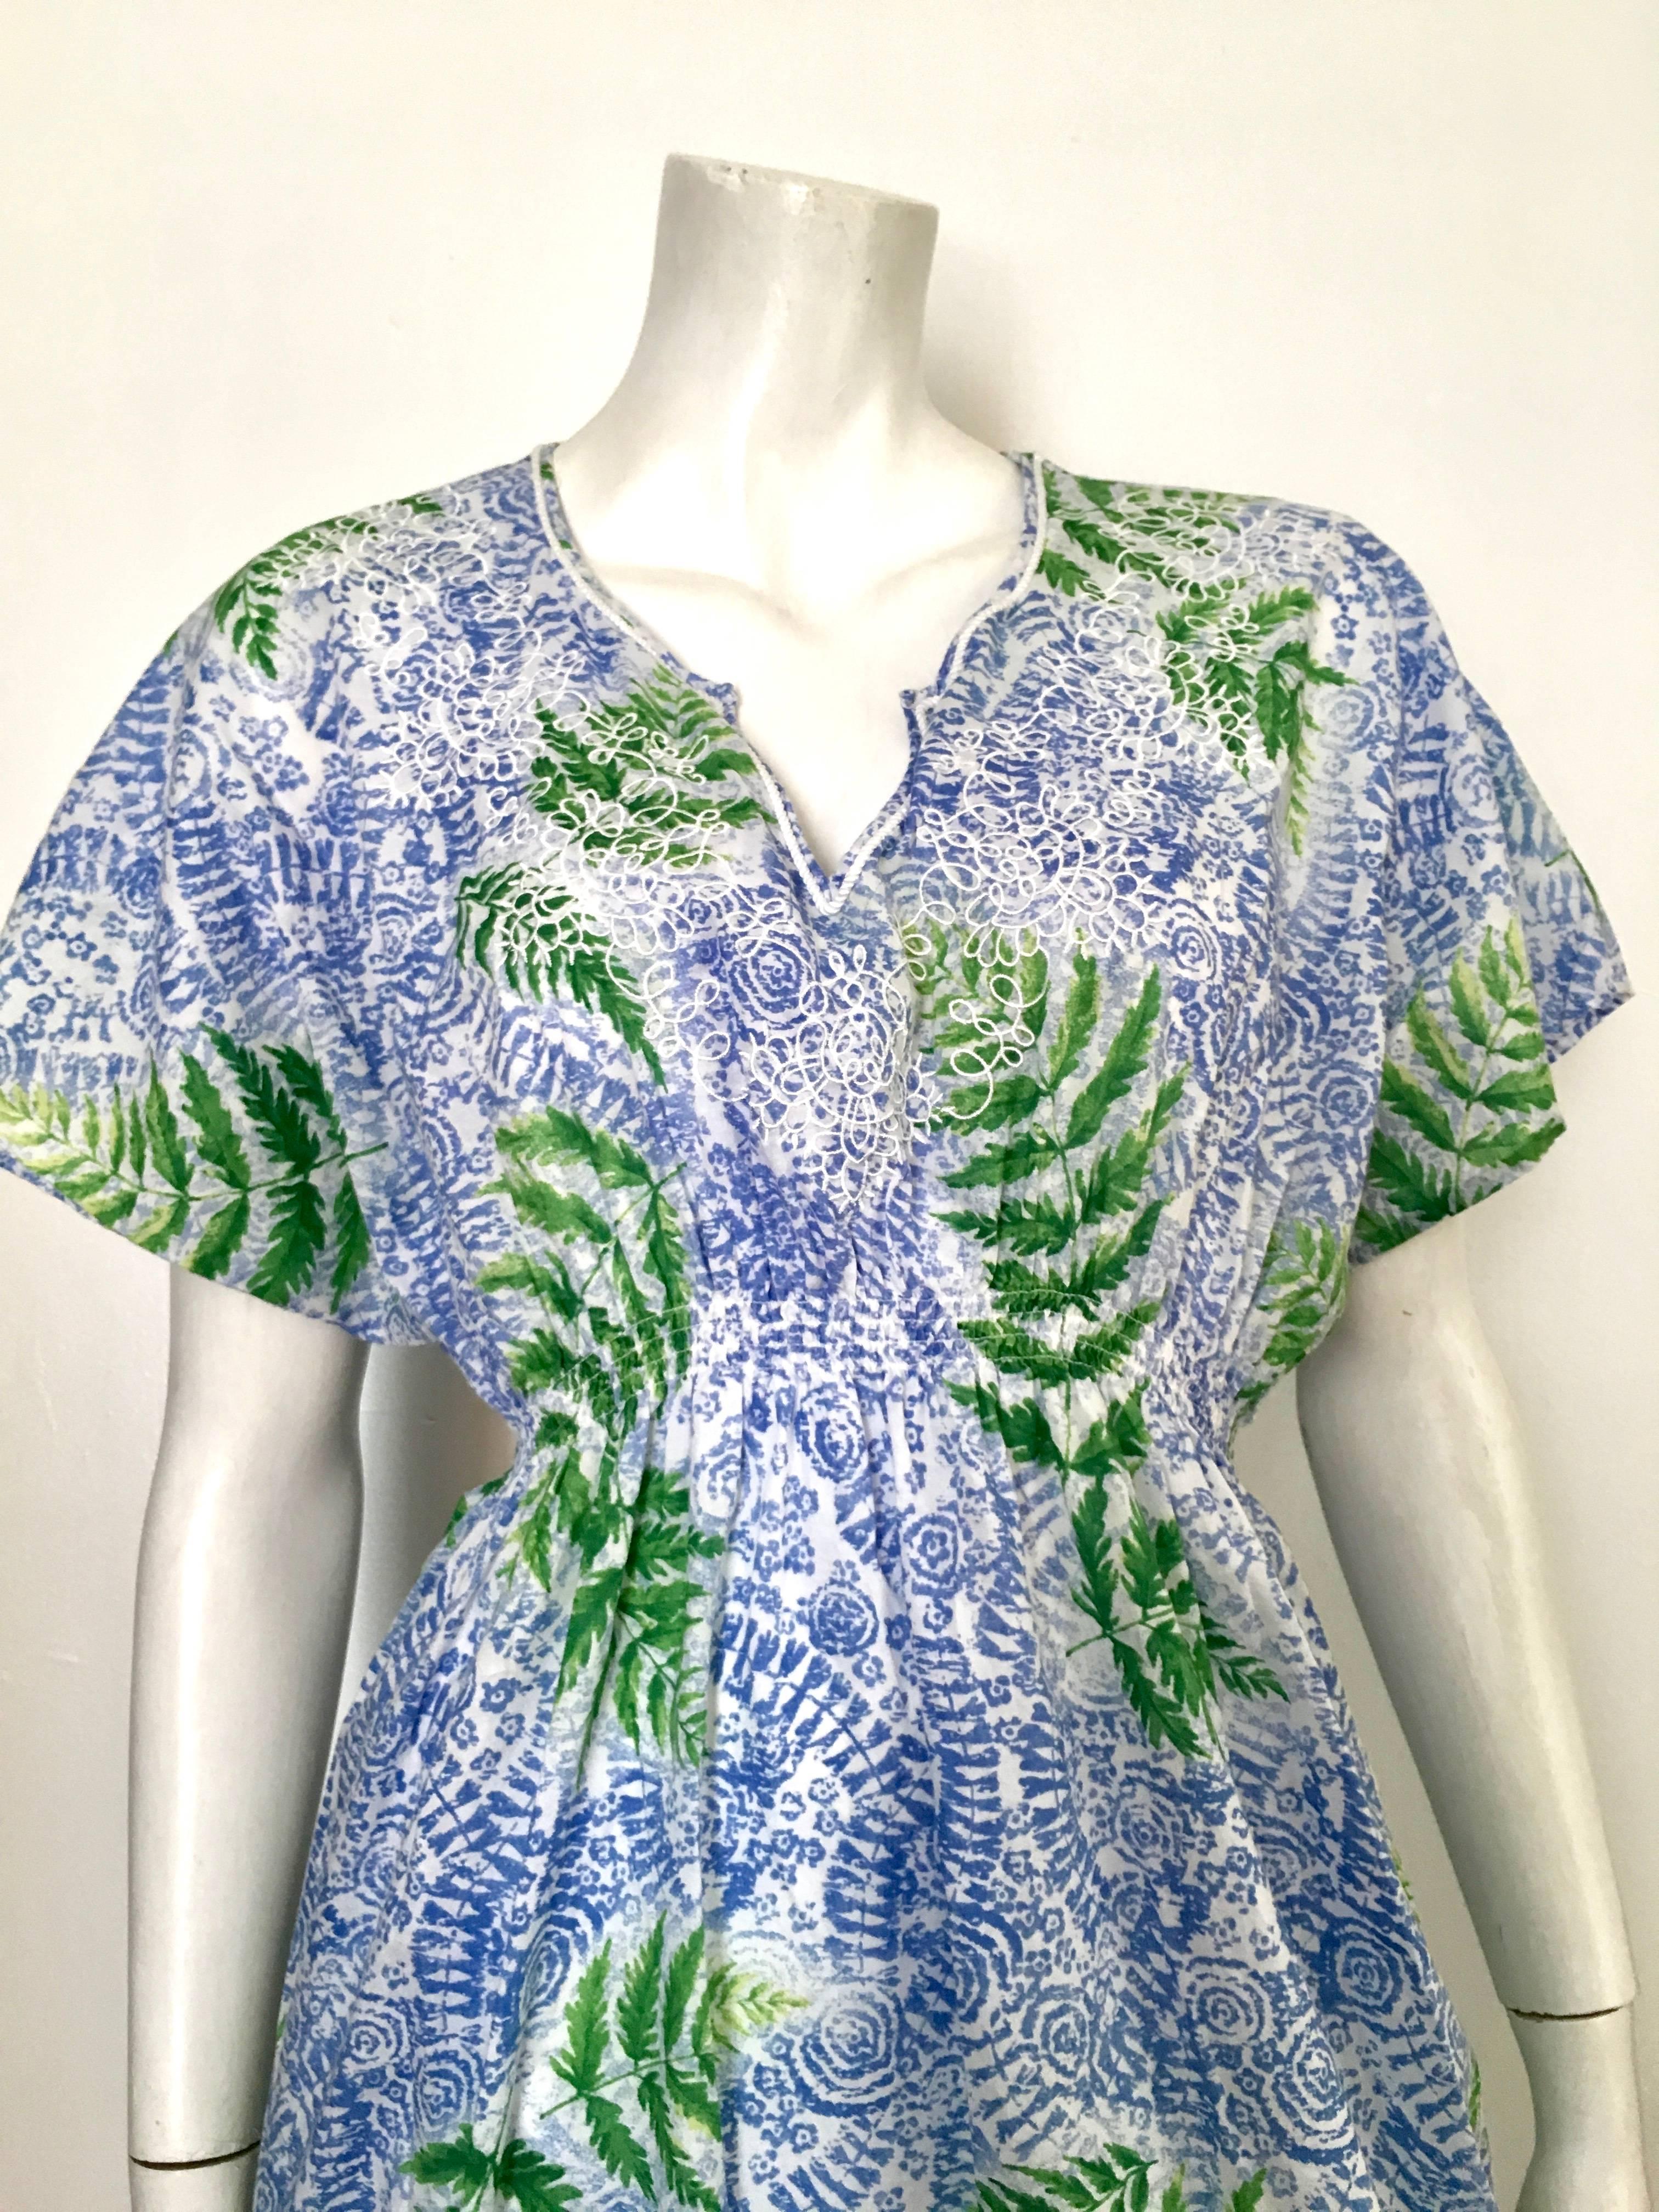 Oscar de la Renta cotton fern pattern short sleeve day dress with pockets is a size medium. Elastic waistband allows for some extra stretch. This fits perfectly on size 4, Matilda the Mannequin, but will also fit a size 6. Ladies please grab your